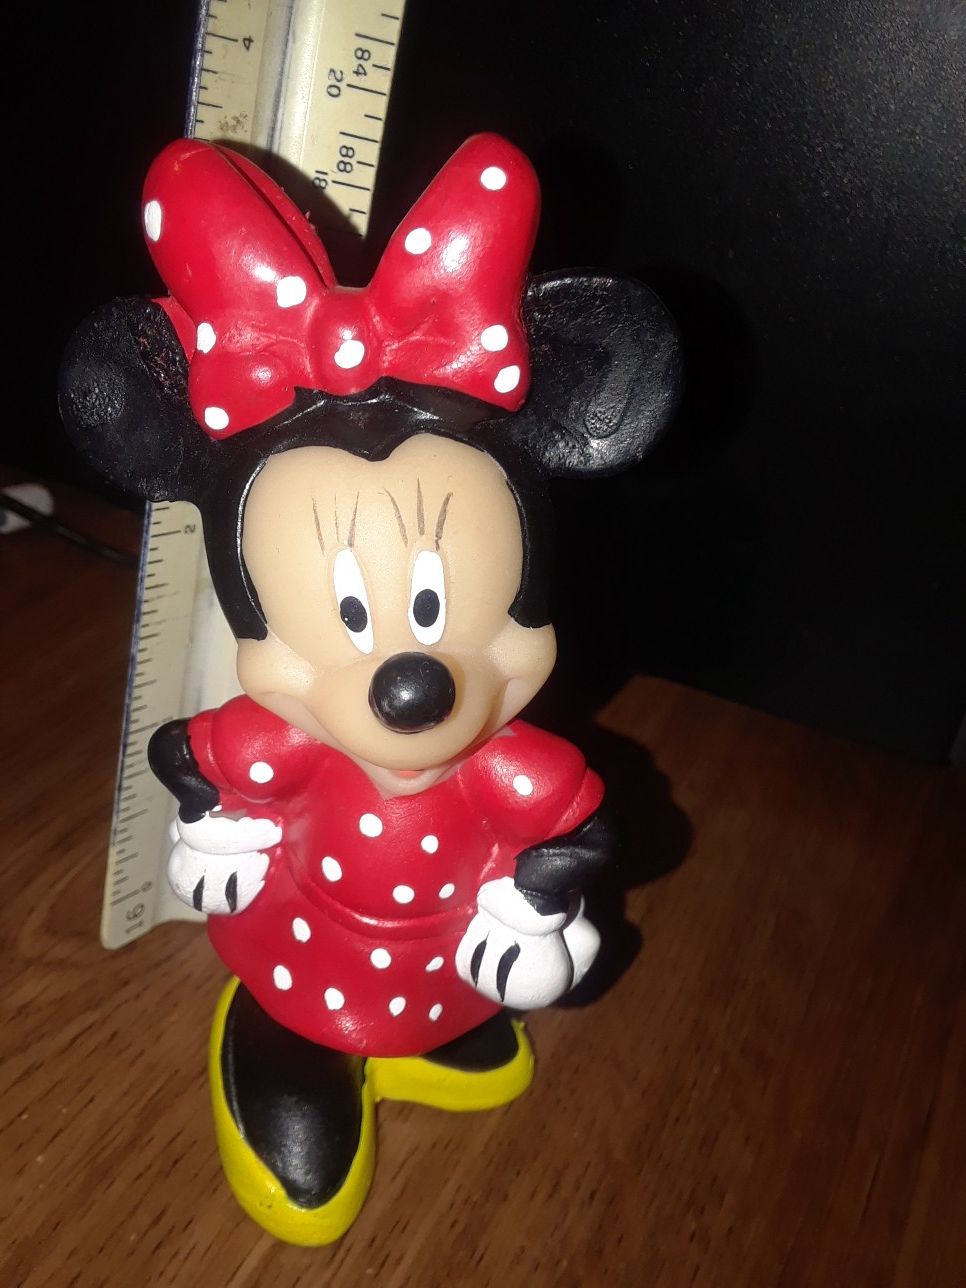 Disney Minnie Mouse plastic figure please check out my other offers